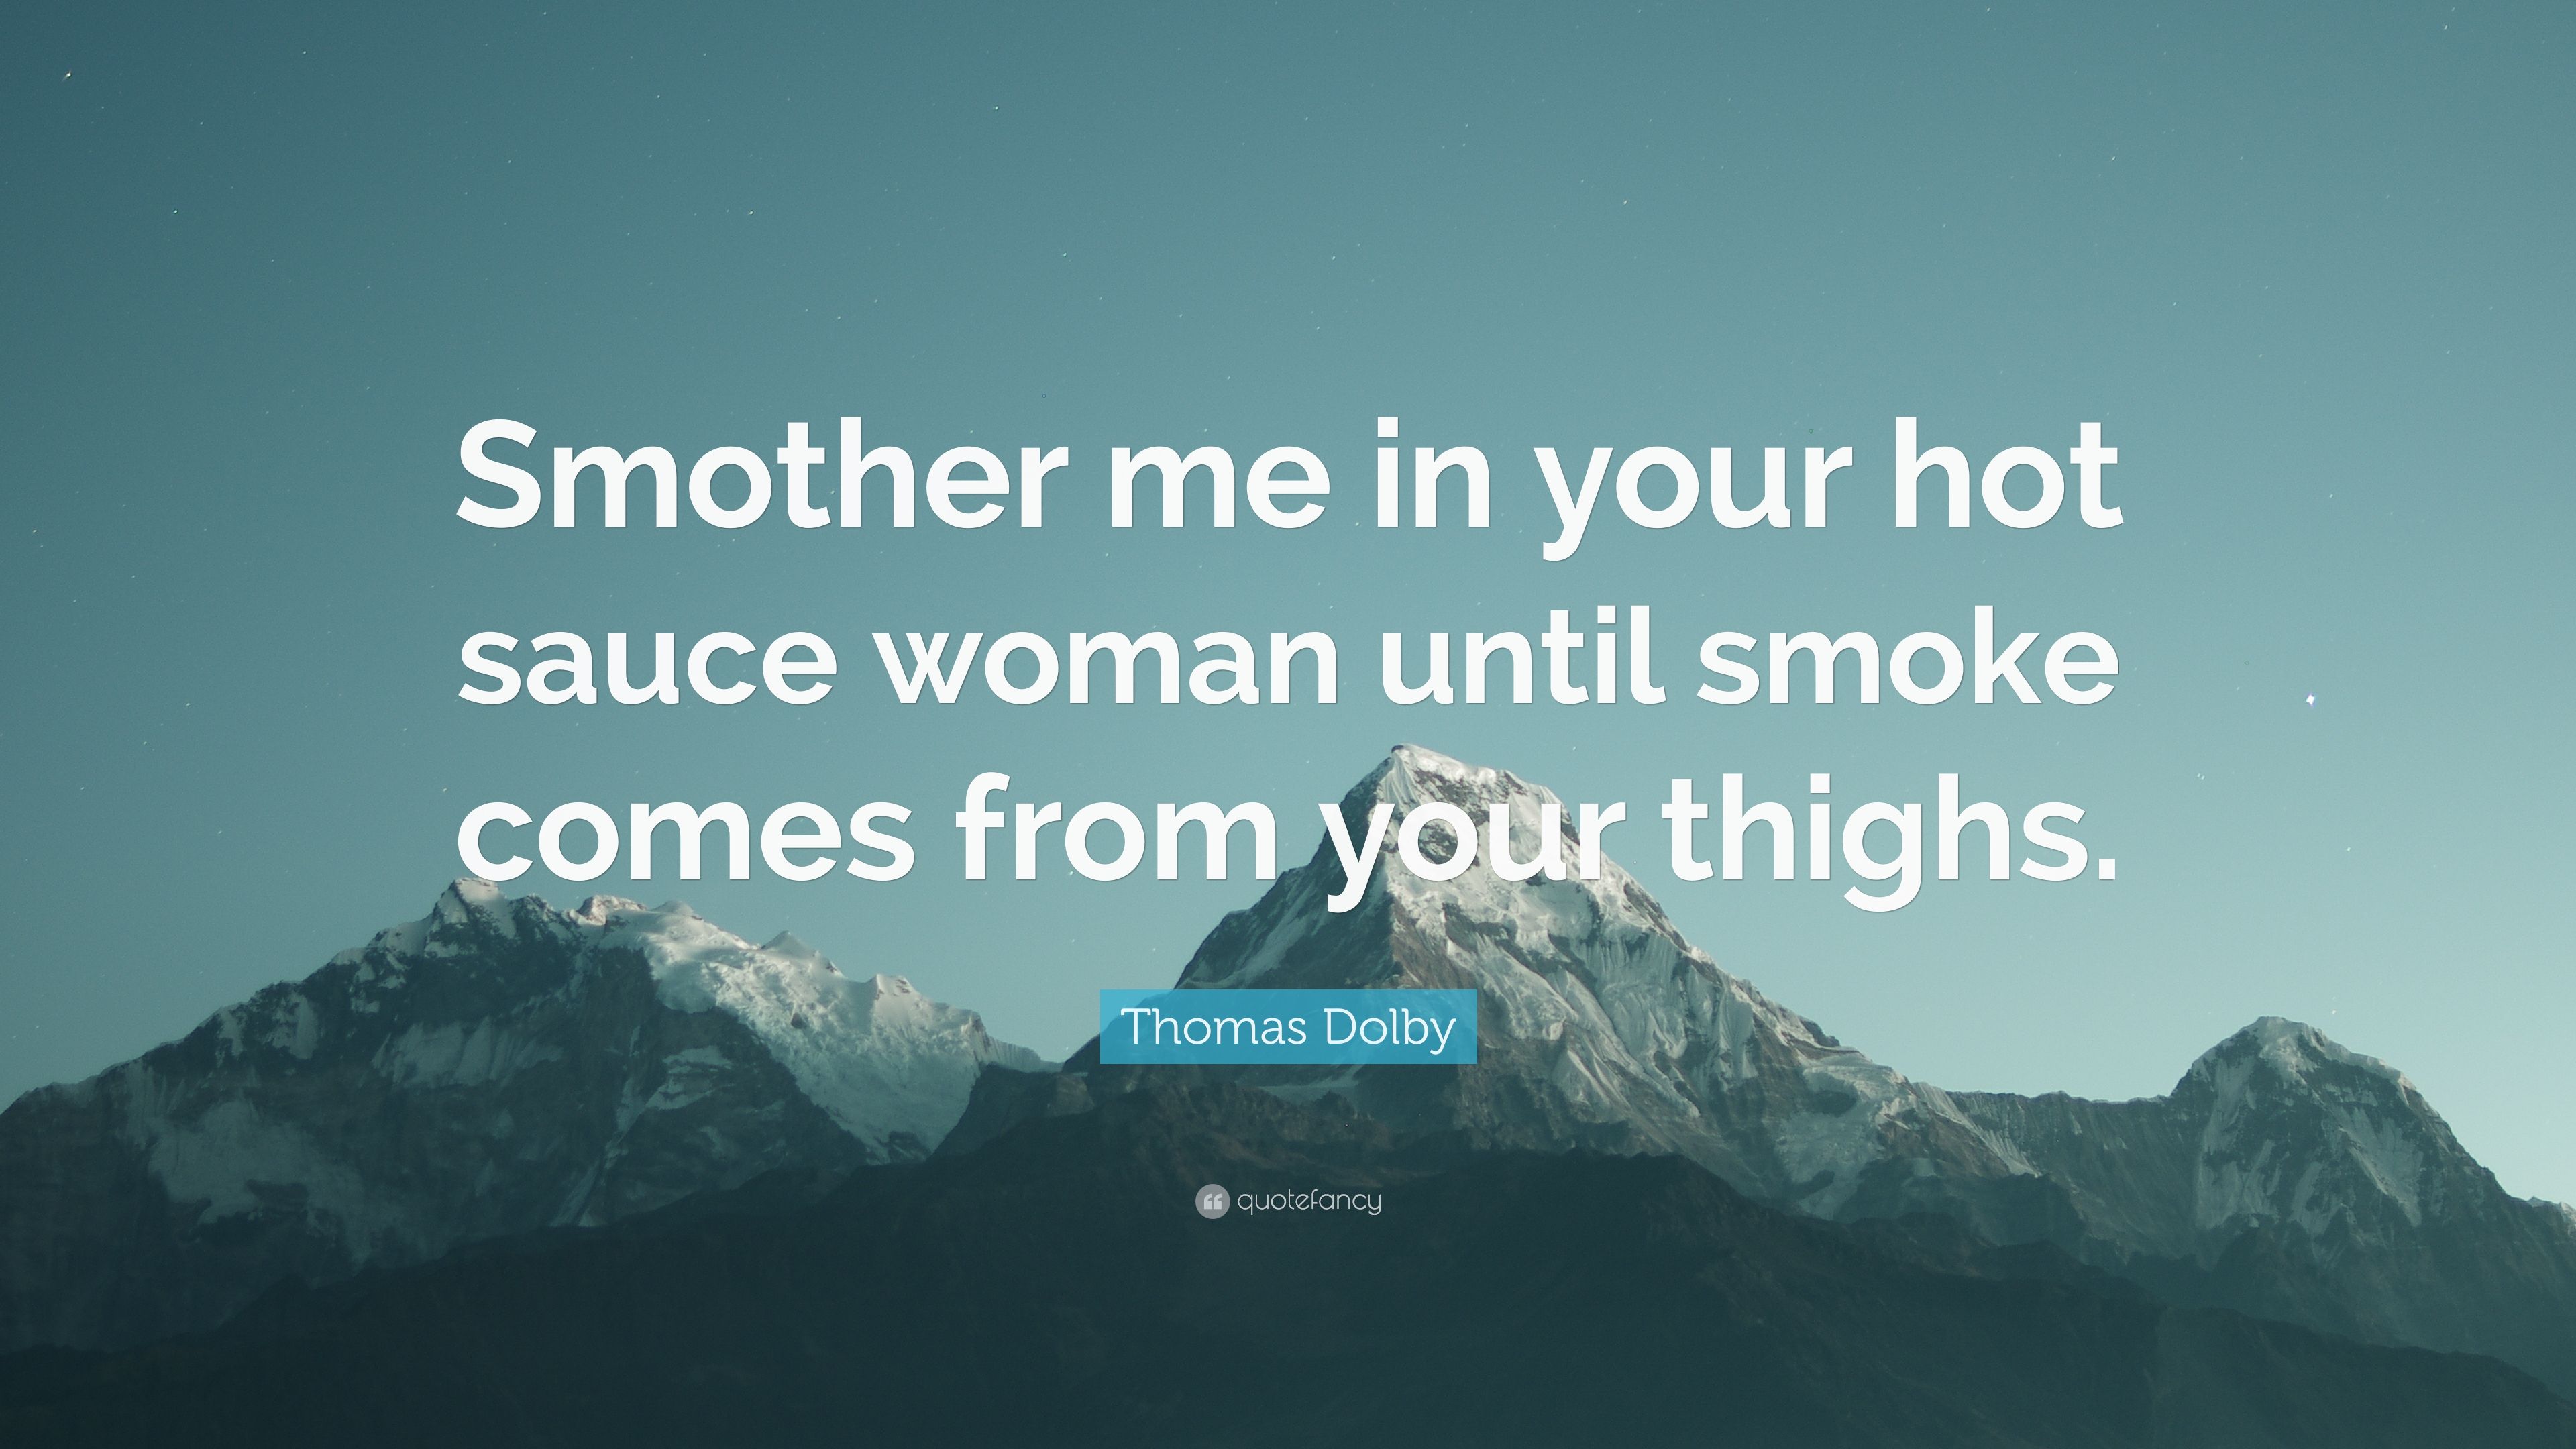 Thomas Dolby Quote: “Smother me in your hot sauce woman until